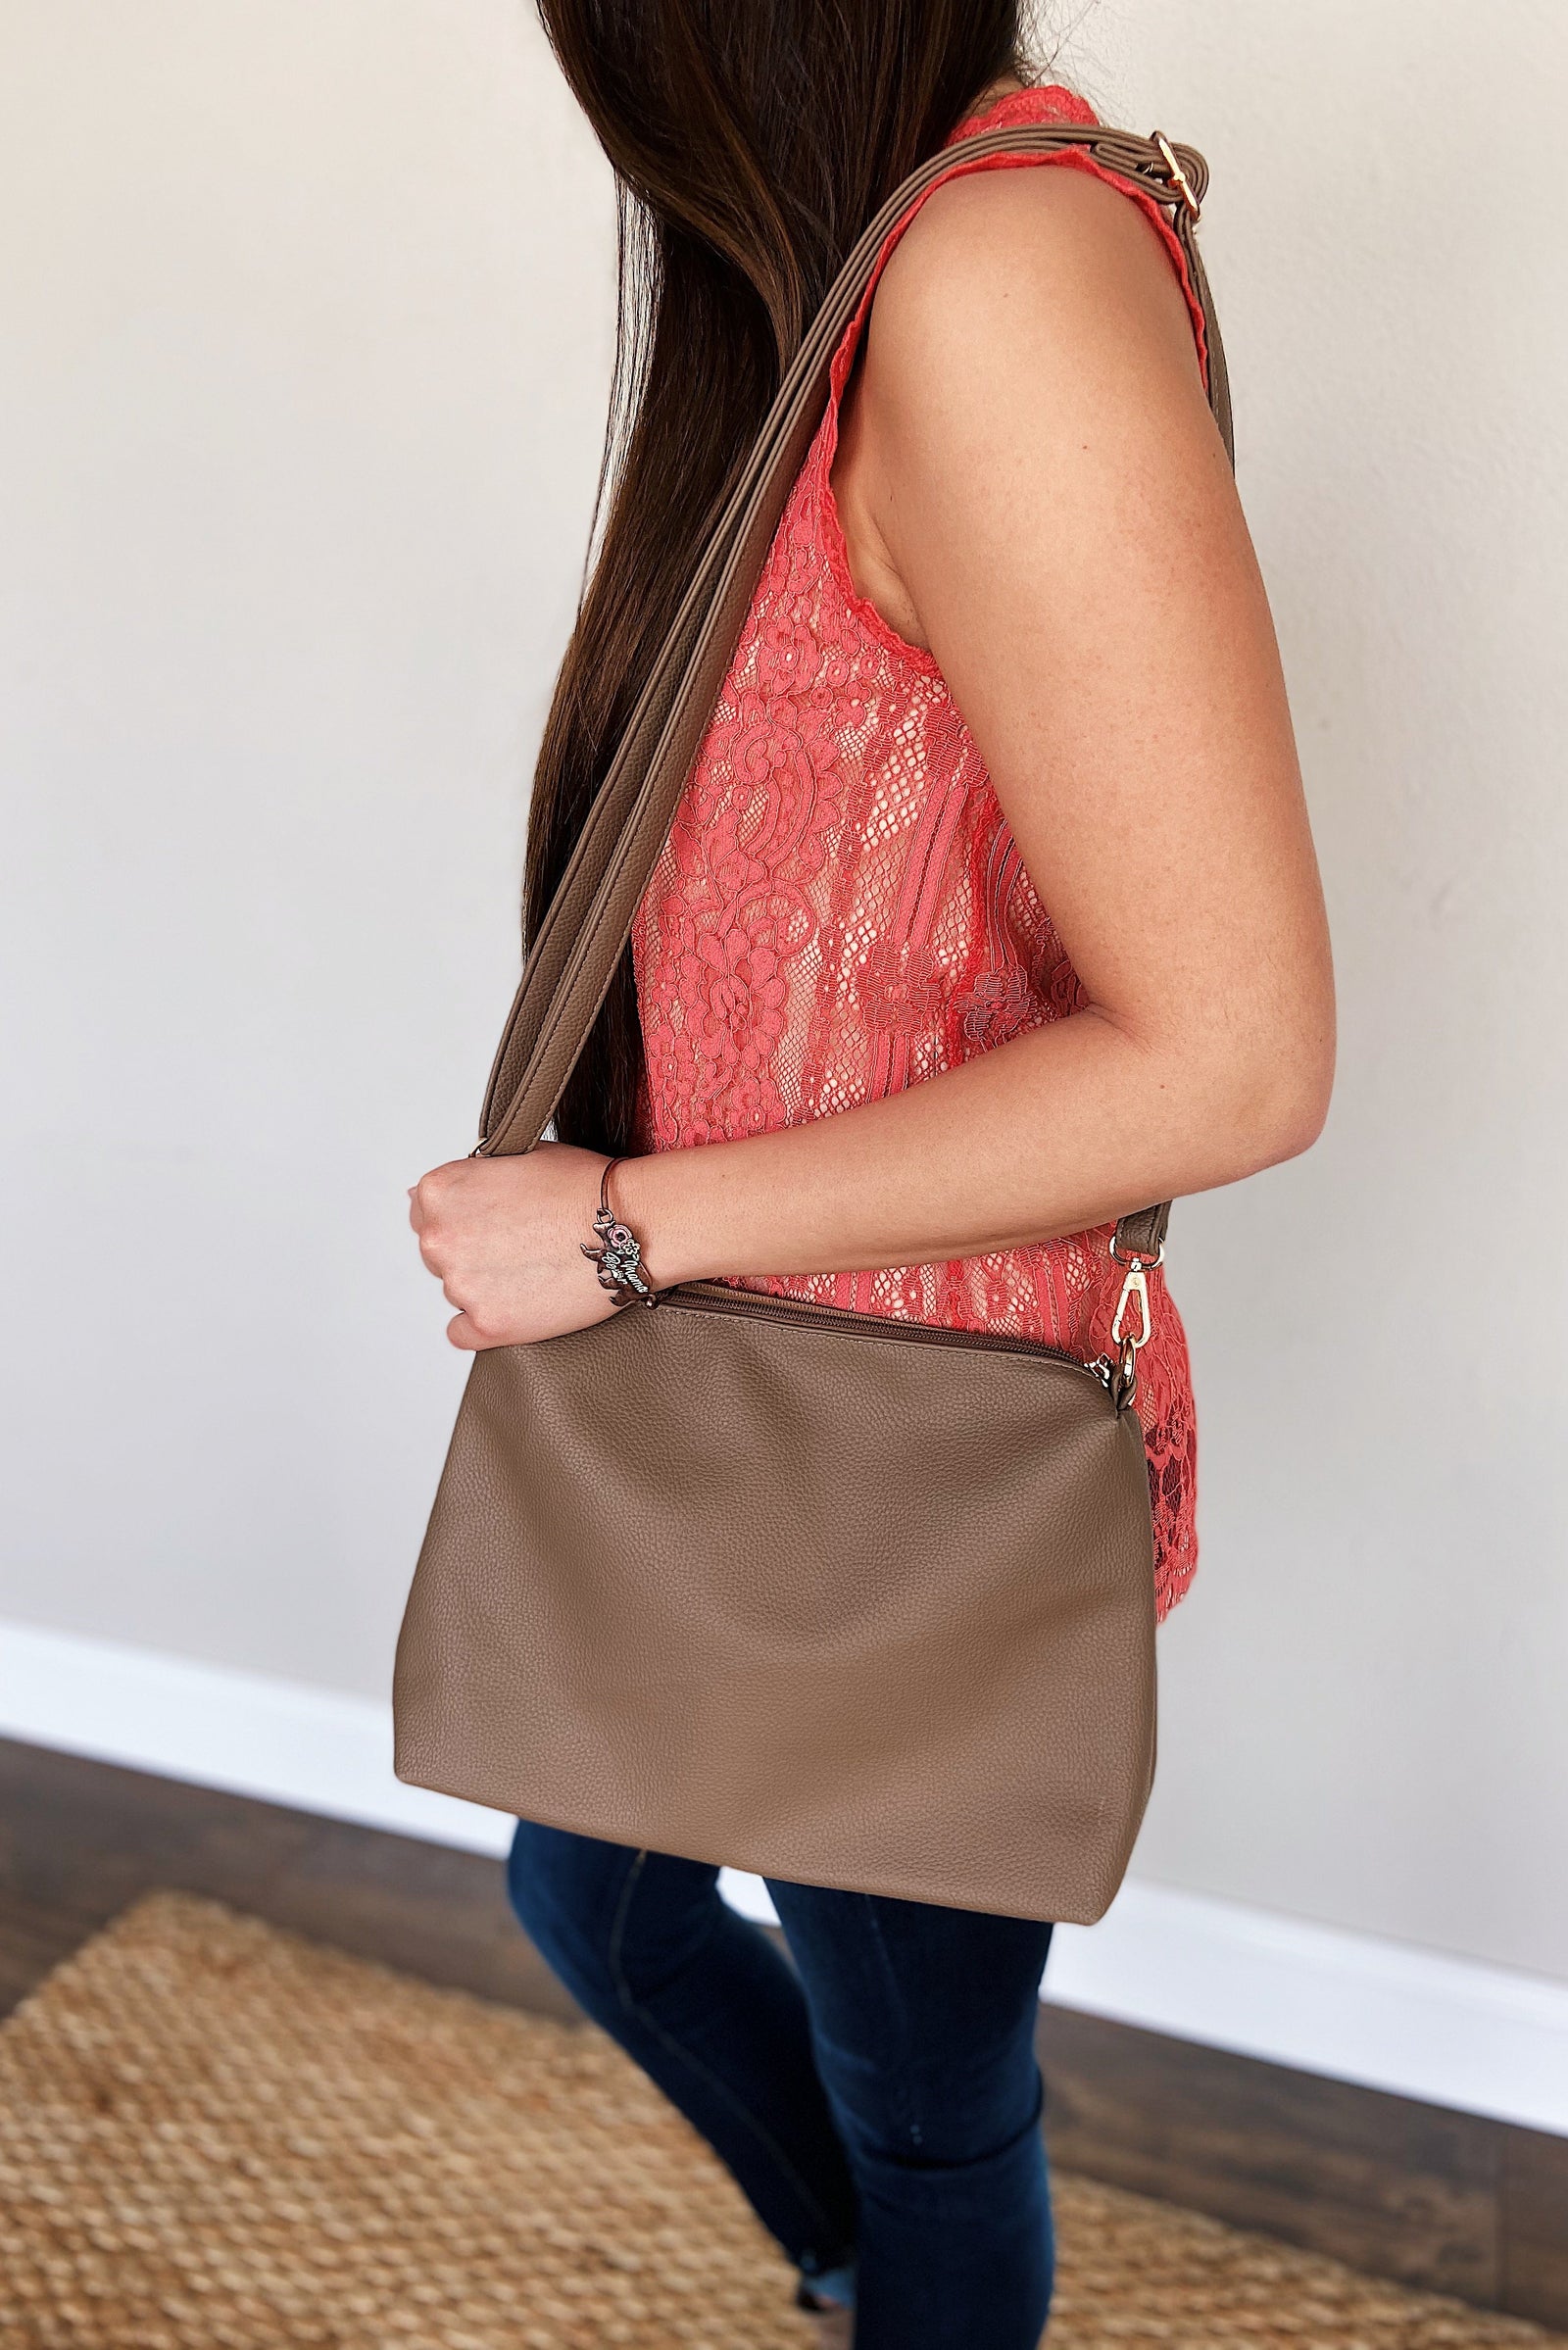 Day After Day Essential Zipper Purse- Dark Taupe